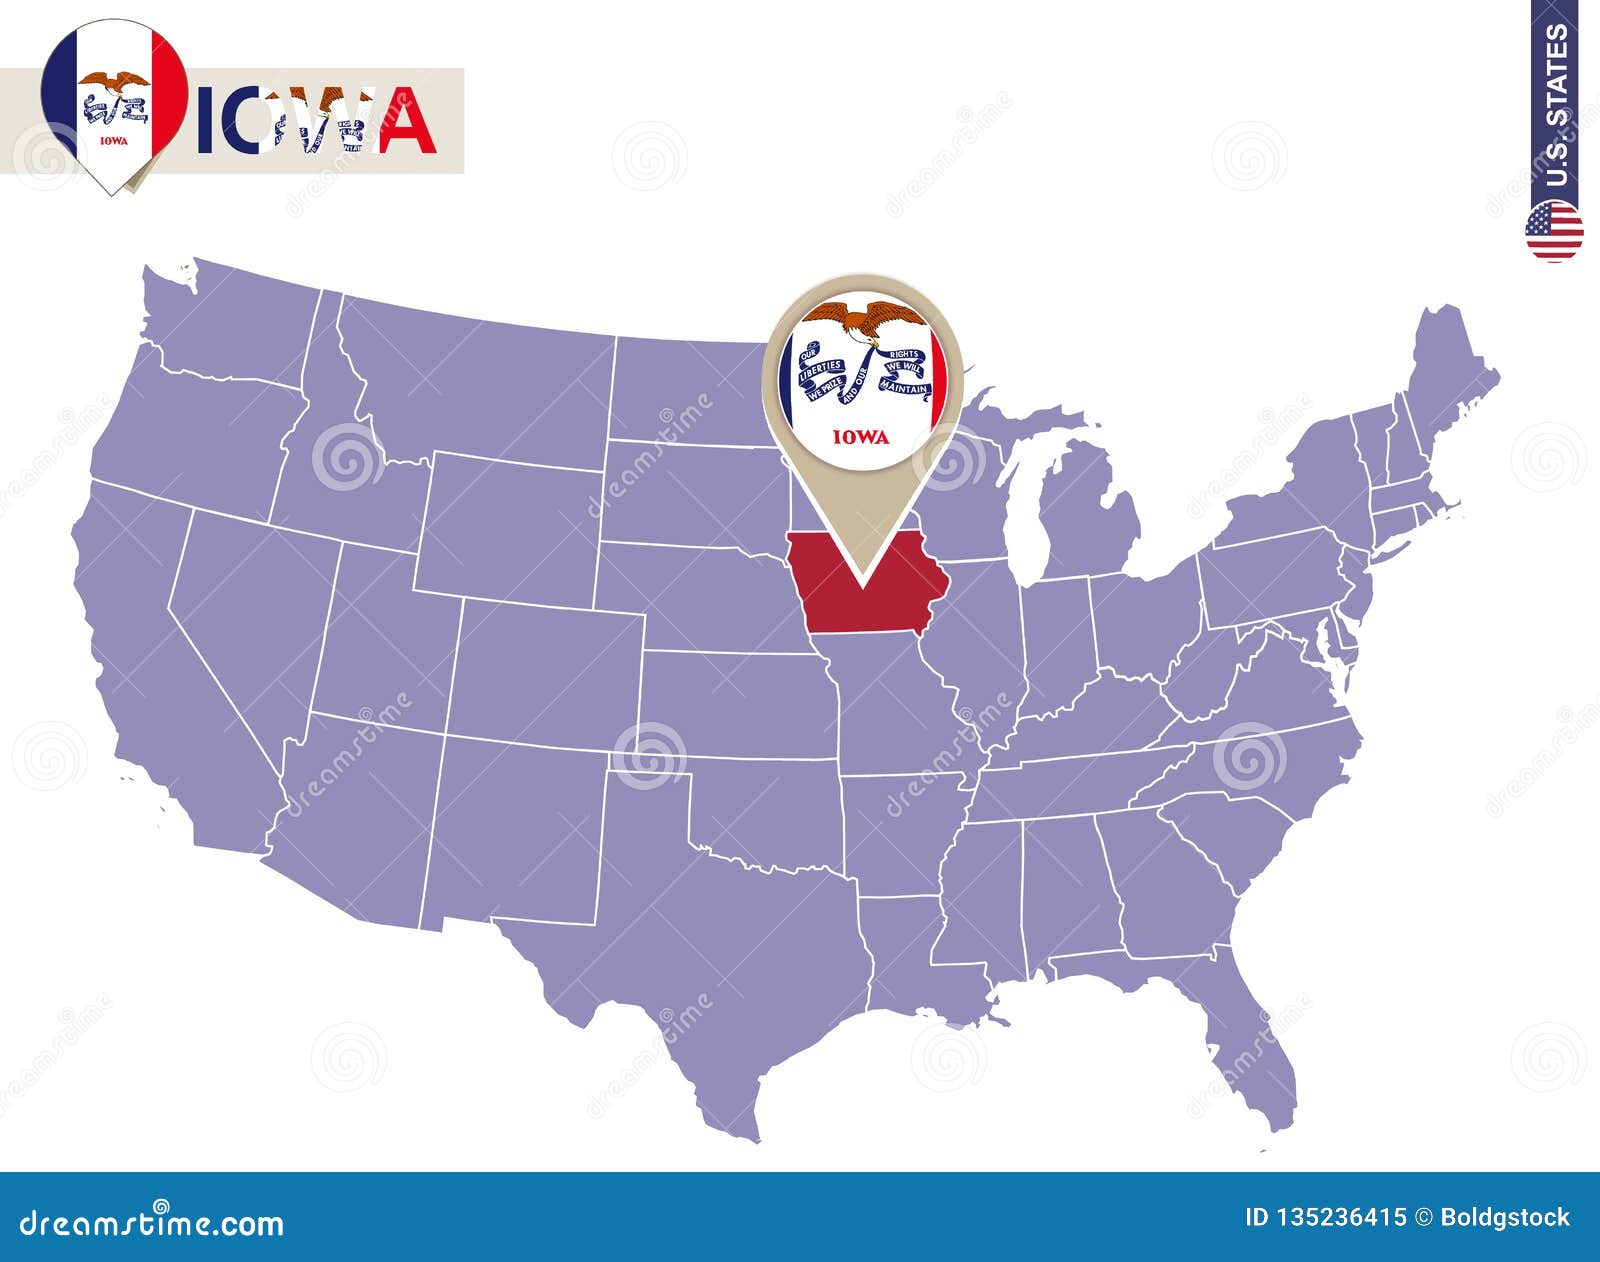 Iowa State On Usa Map Iowa Flag And Map Stock Vector